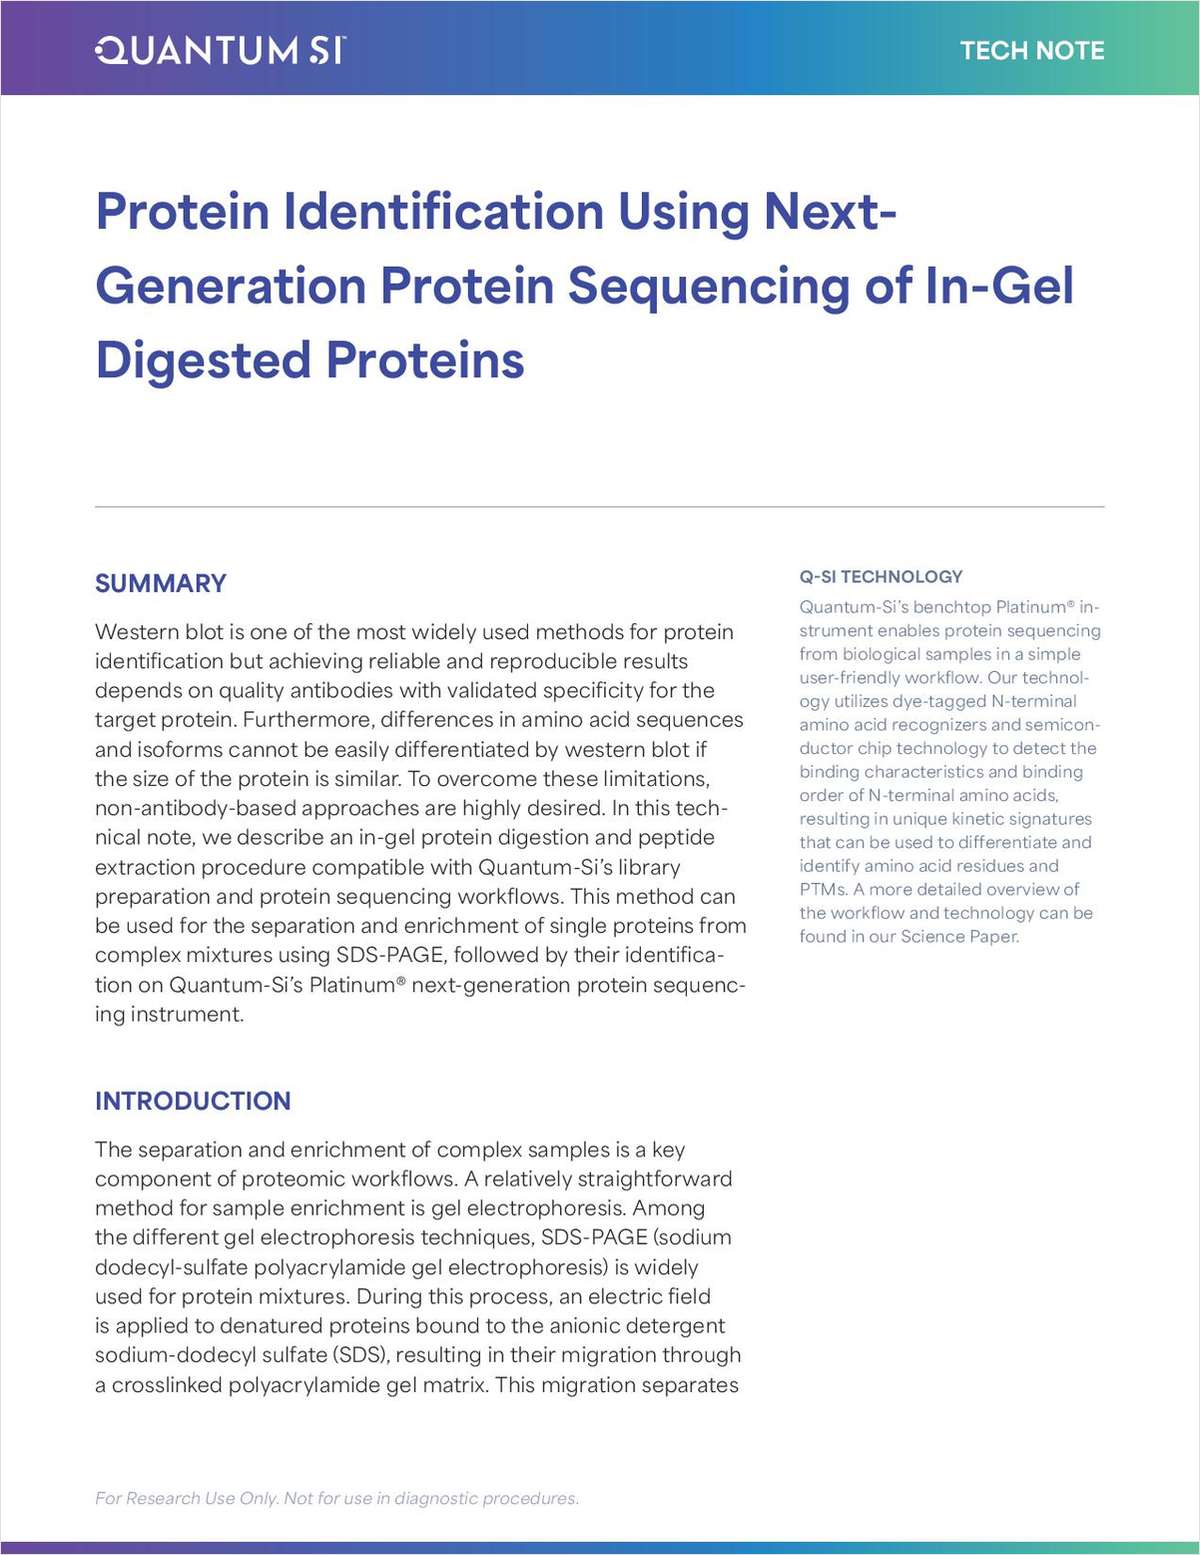 Protein Identification Using Next-Generation Protein Sequencing of In-Gel Digested Proteins